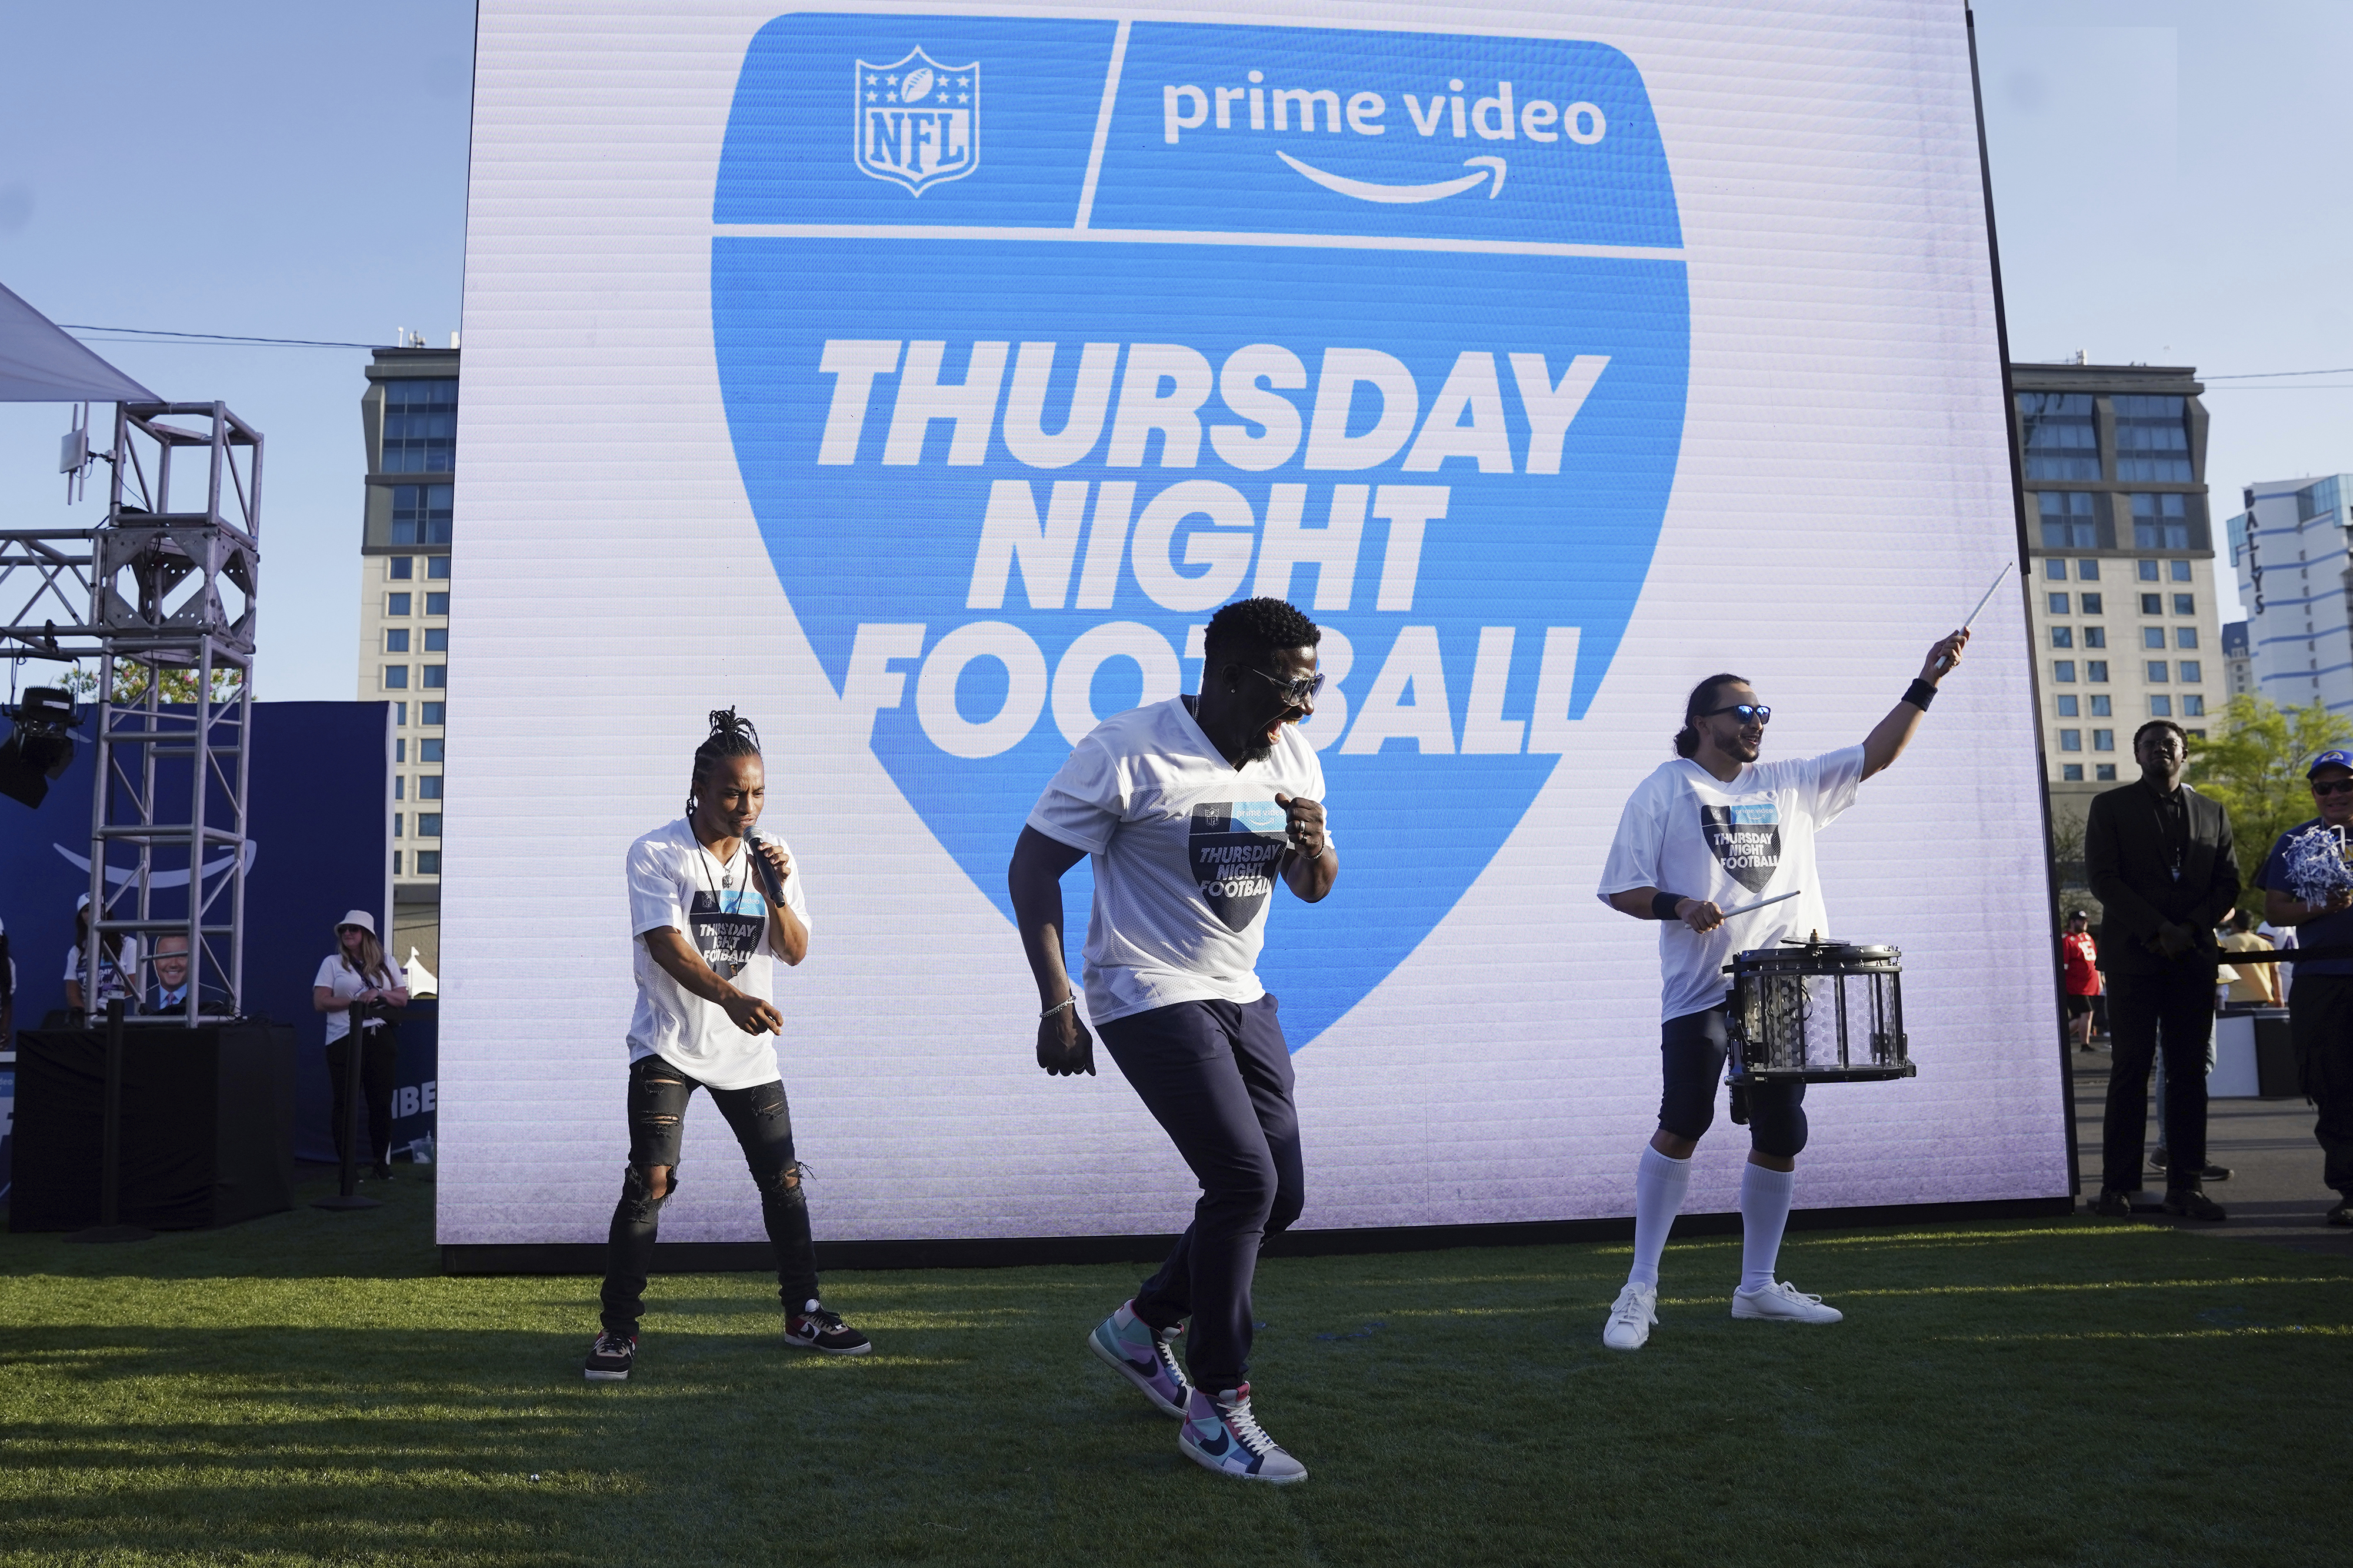 Thursday Night Football Help Hub  Record, Rewind, and Fast Forward with  TNF Help